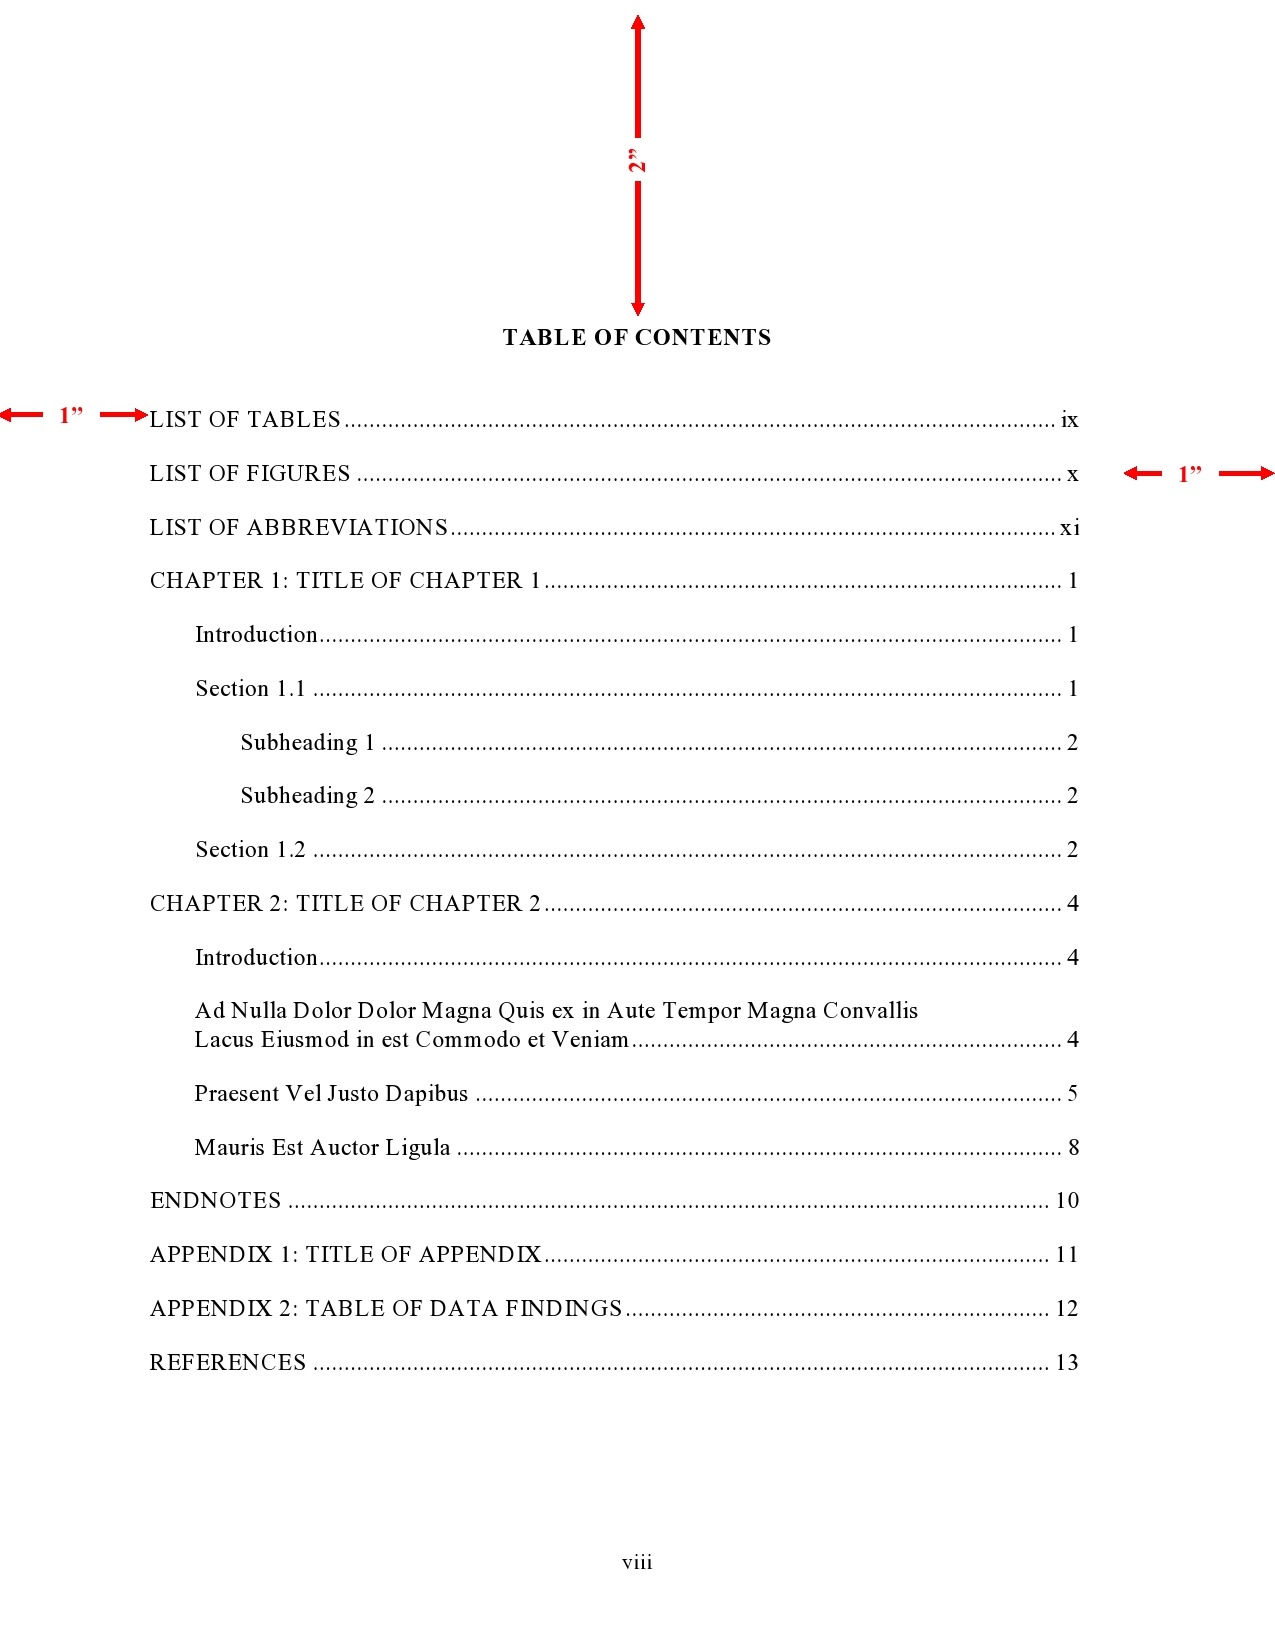 Contents page for psychology dissertation